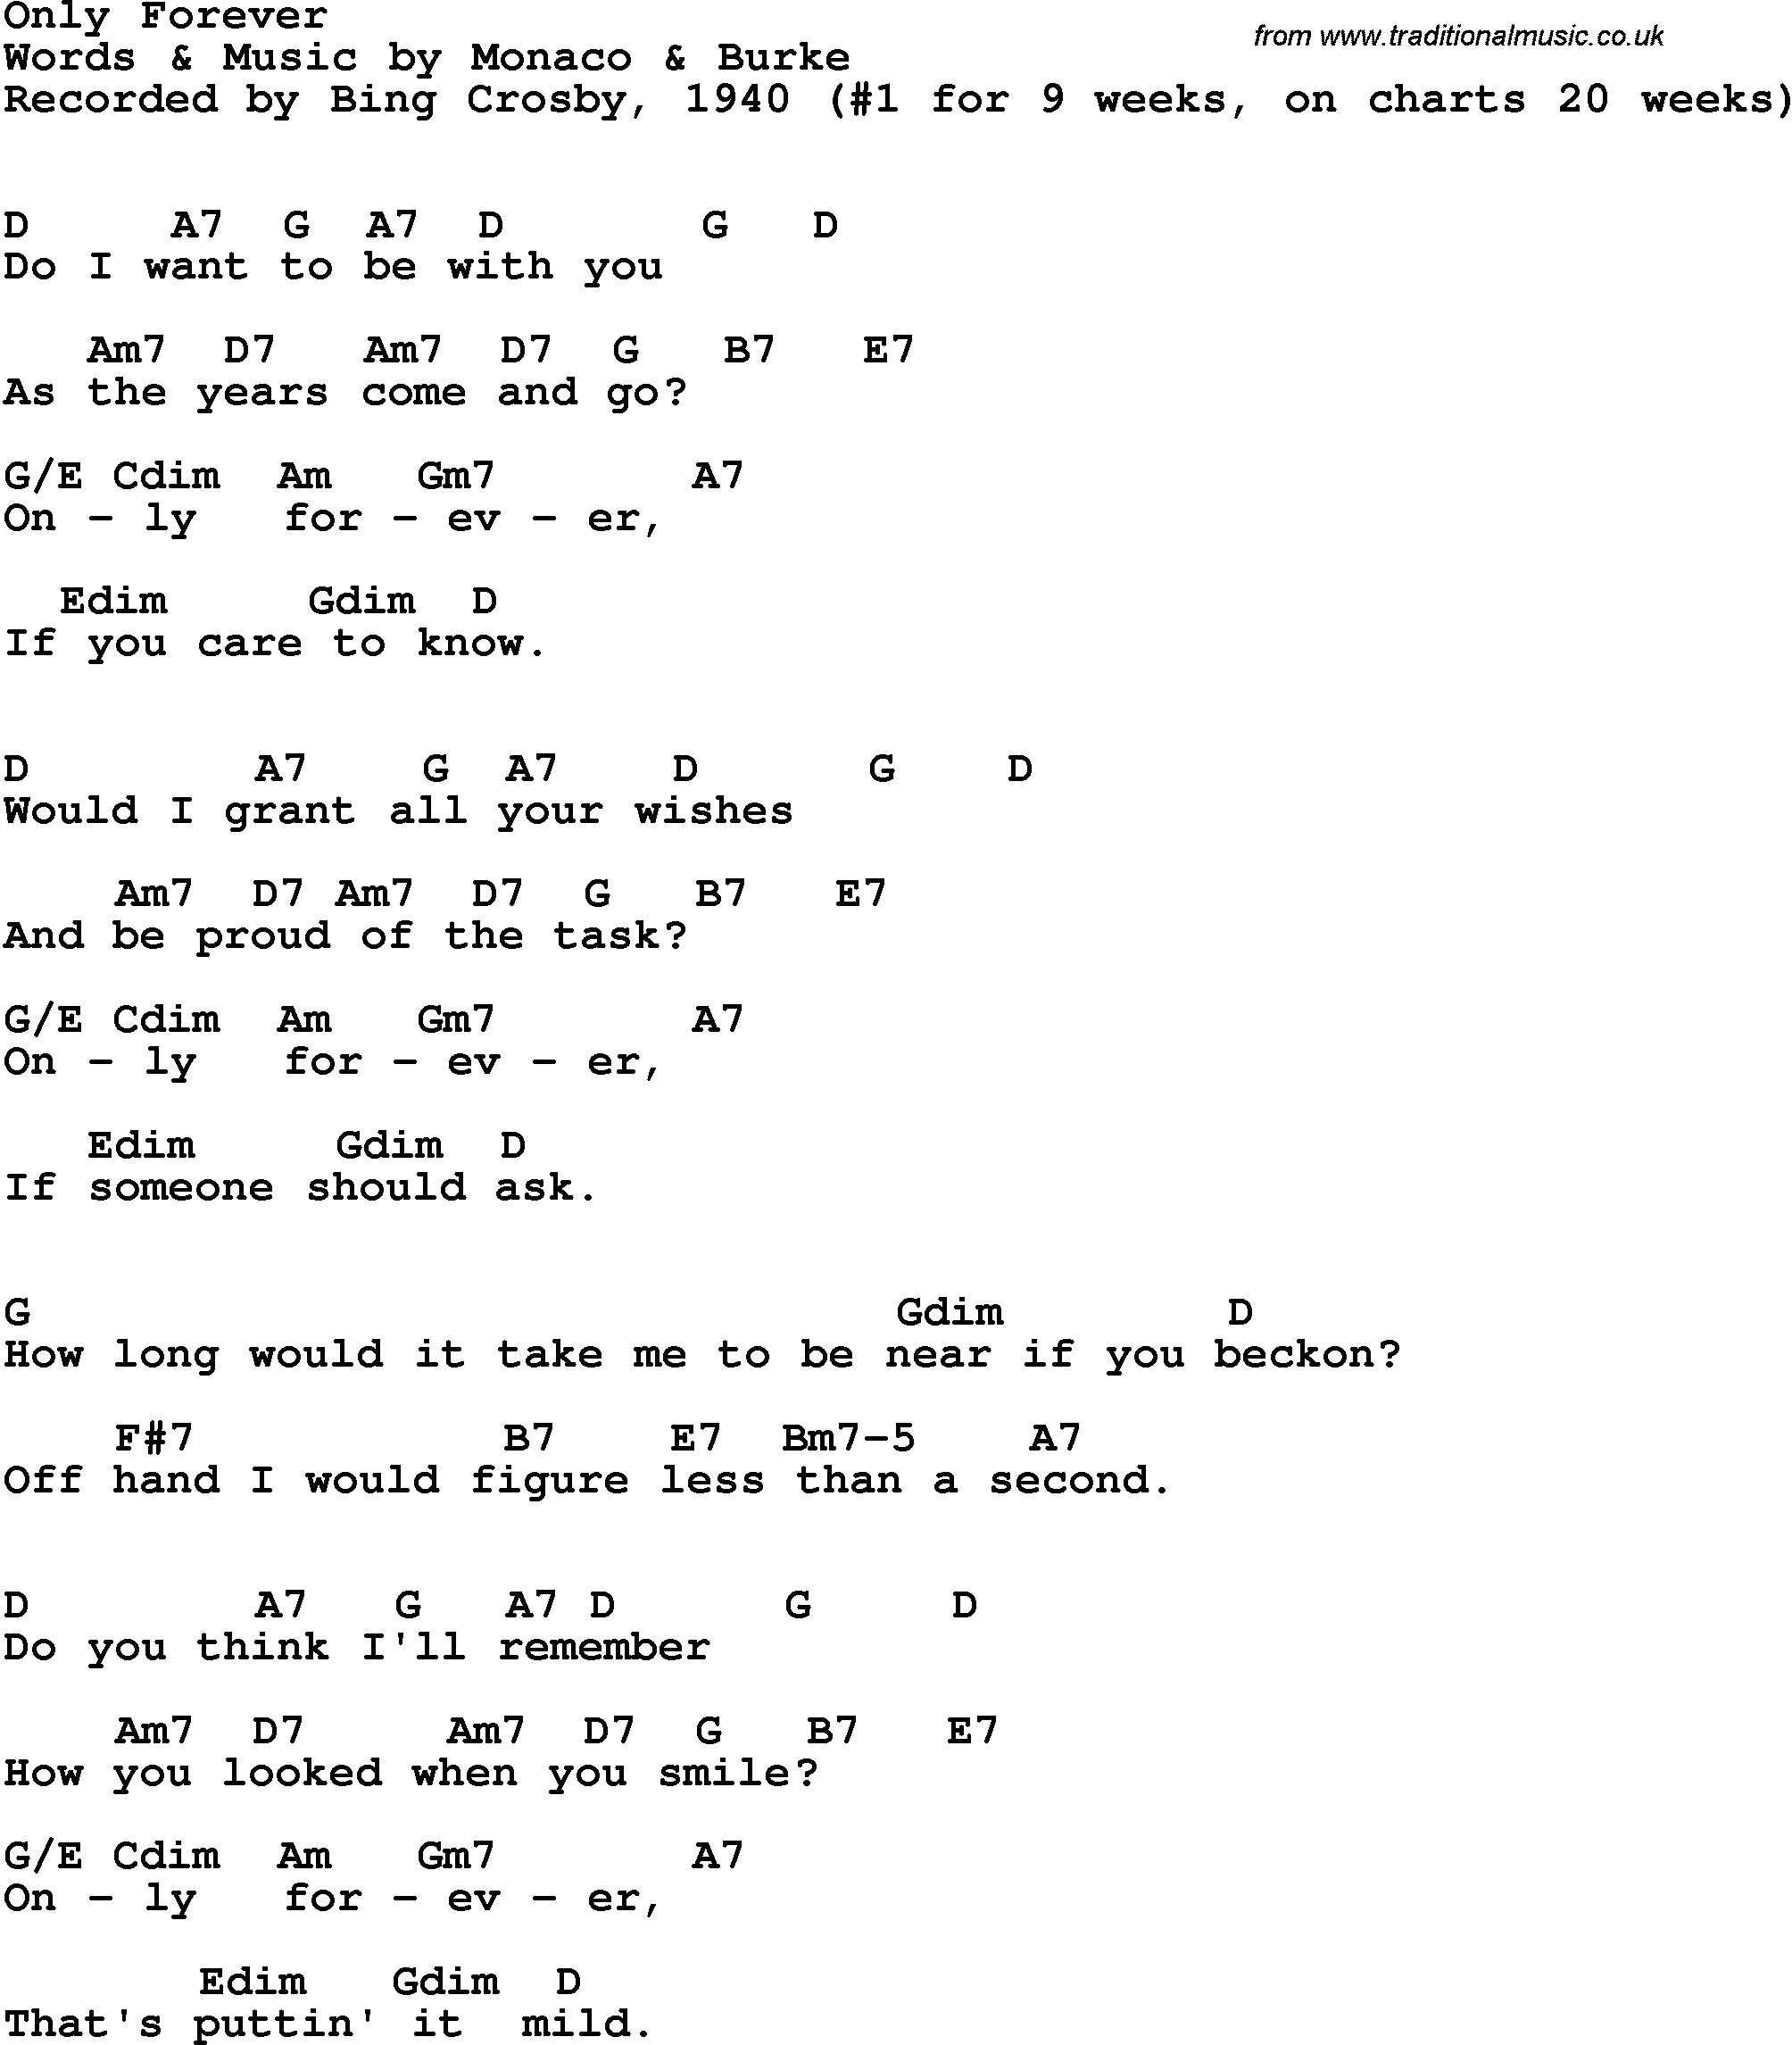 Song Lyrics with guitar chords for Only Forever - Bing Crosby, 1940